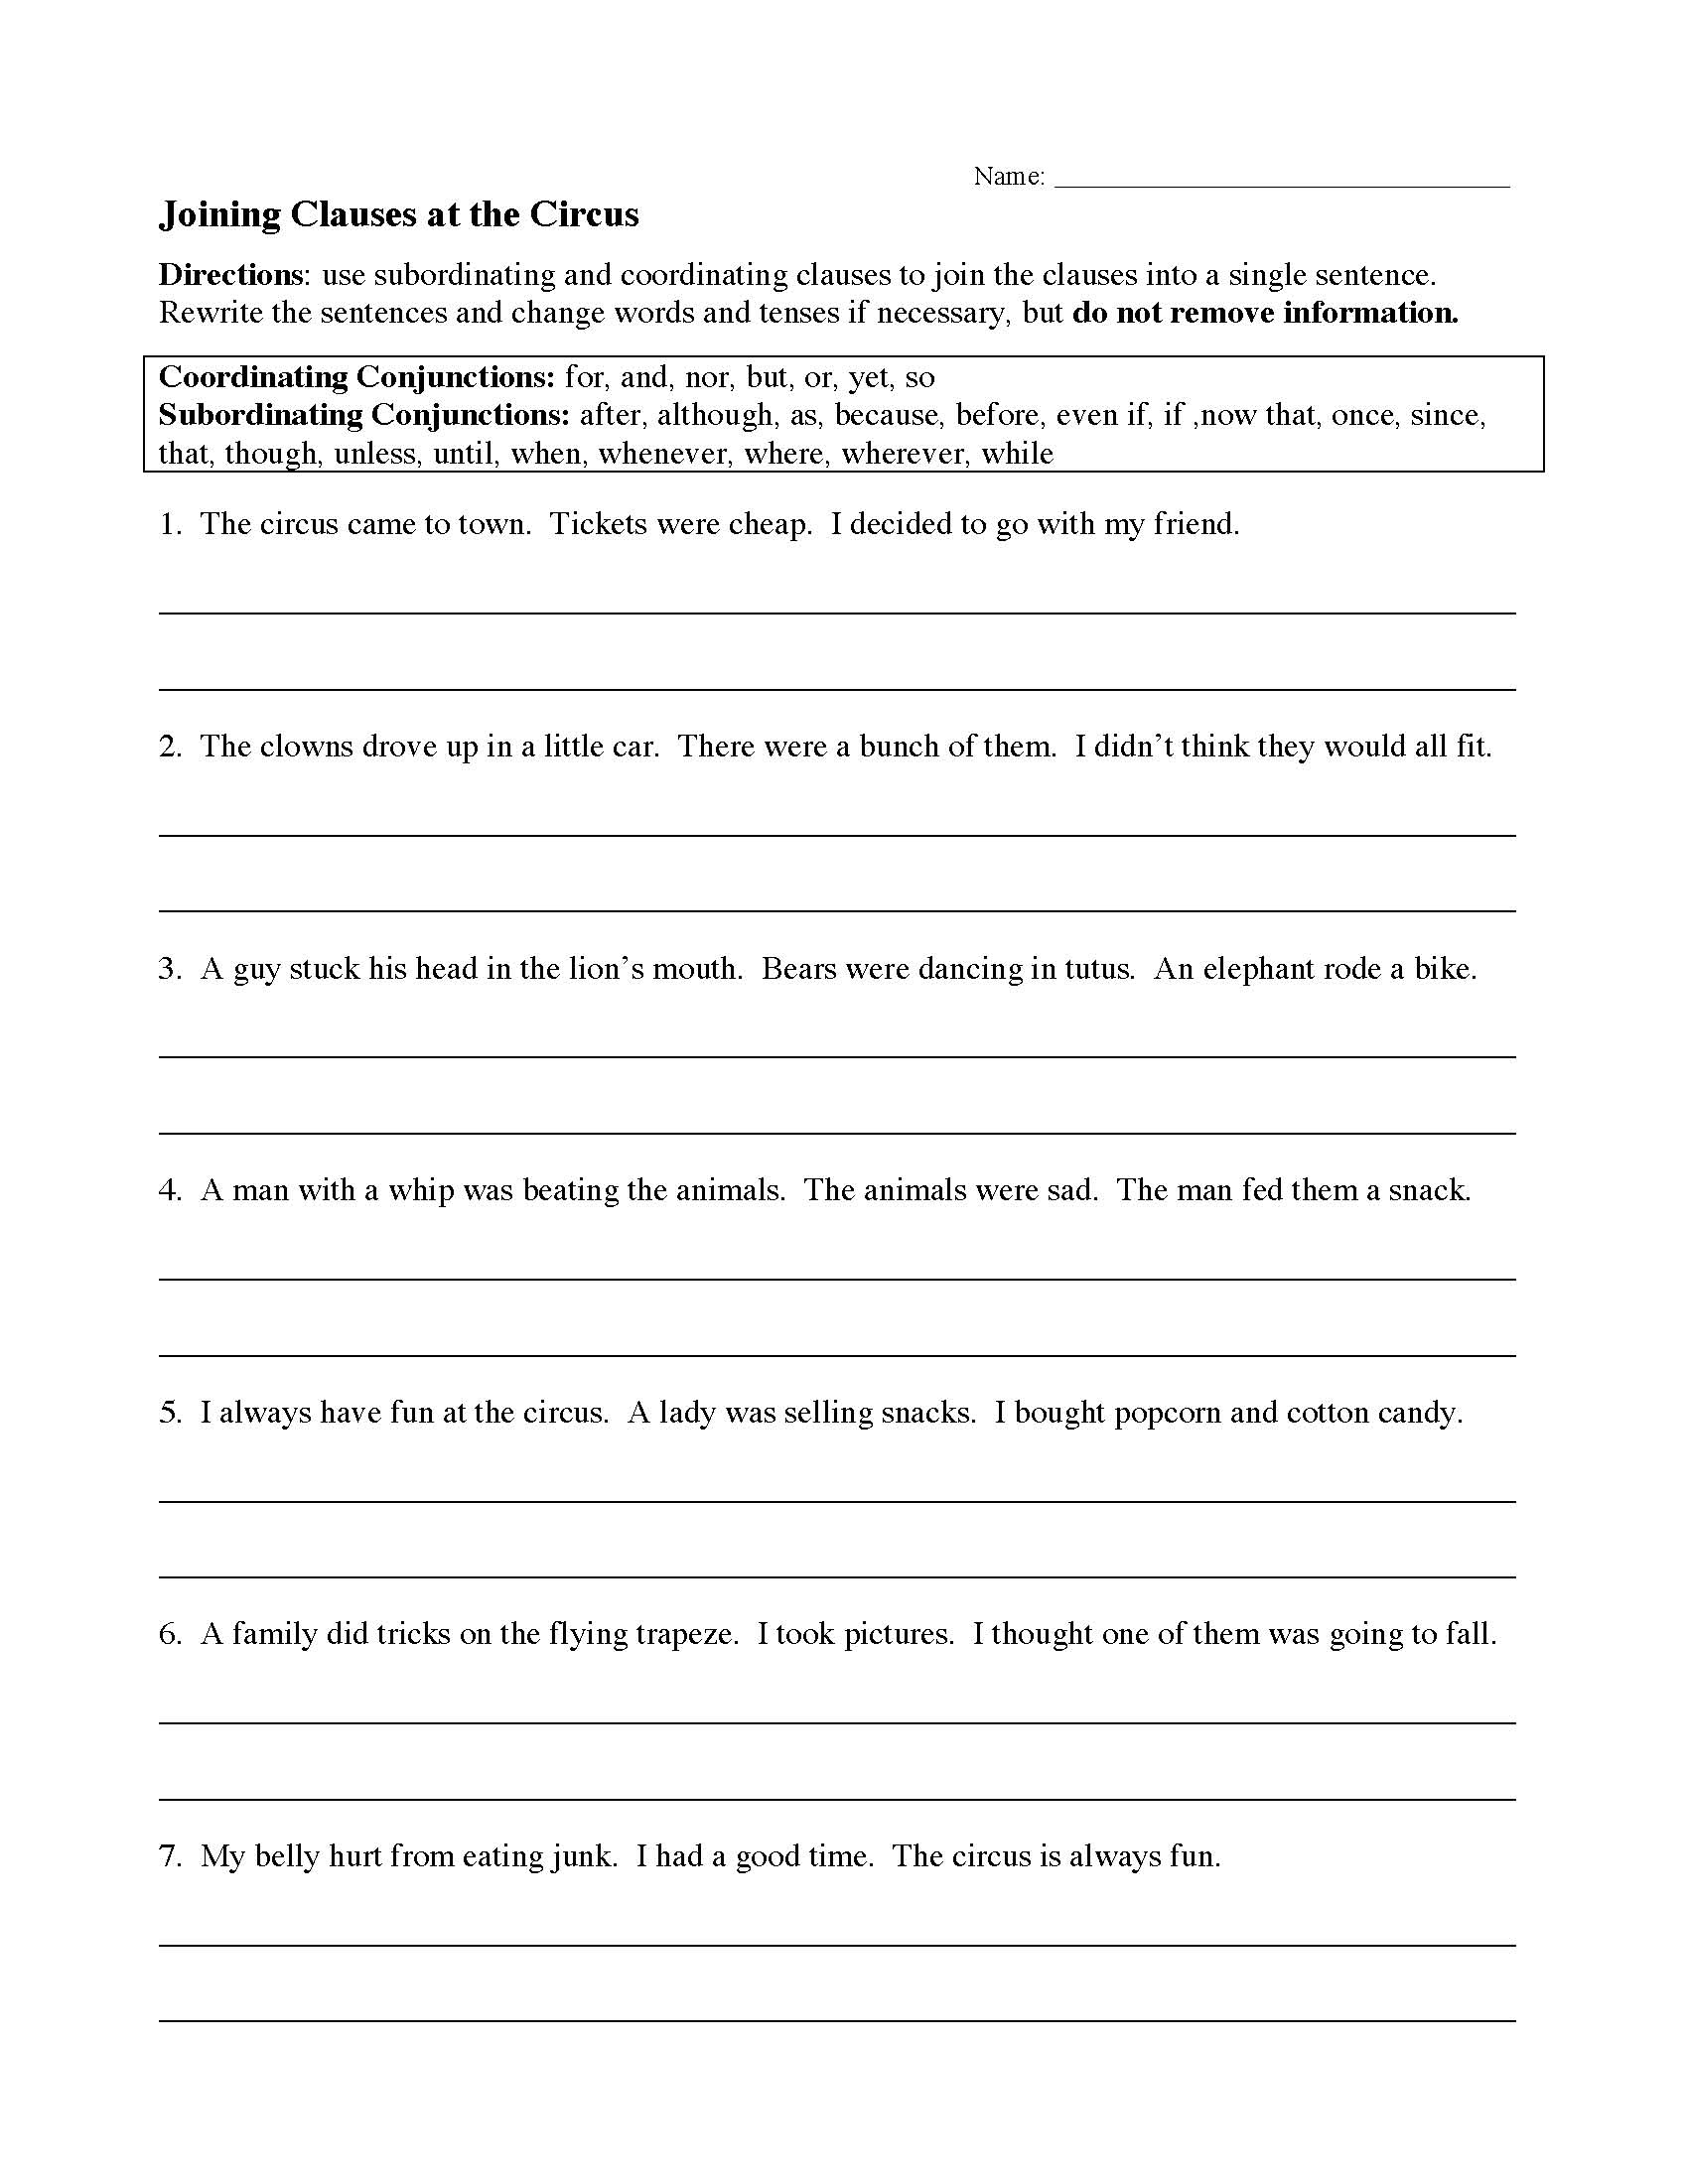 joining-clauses-at-the-circus-worksheet-preview